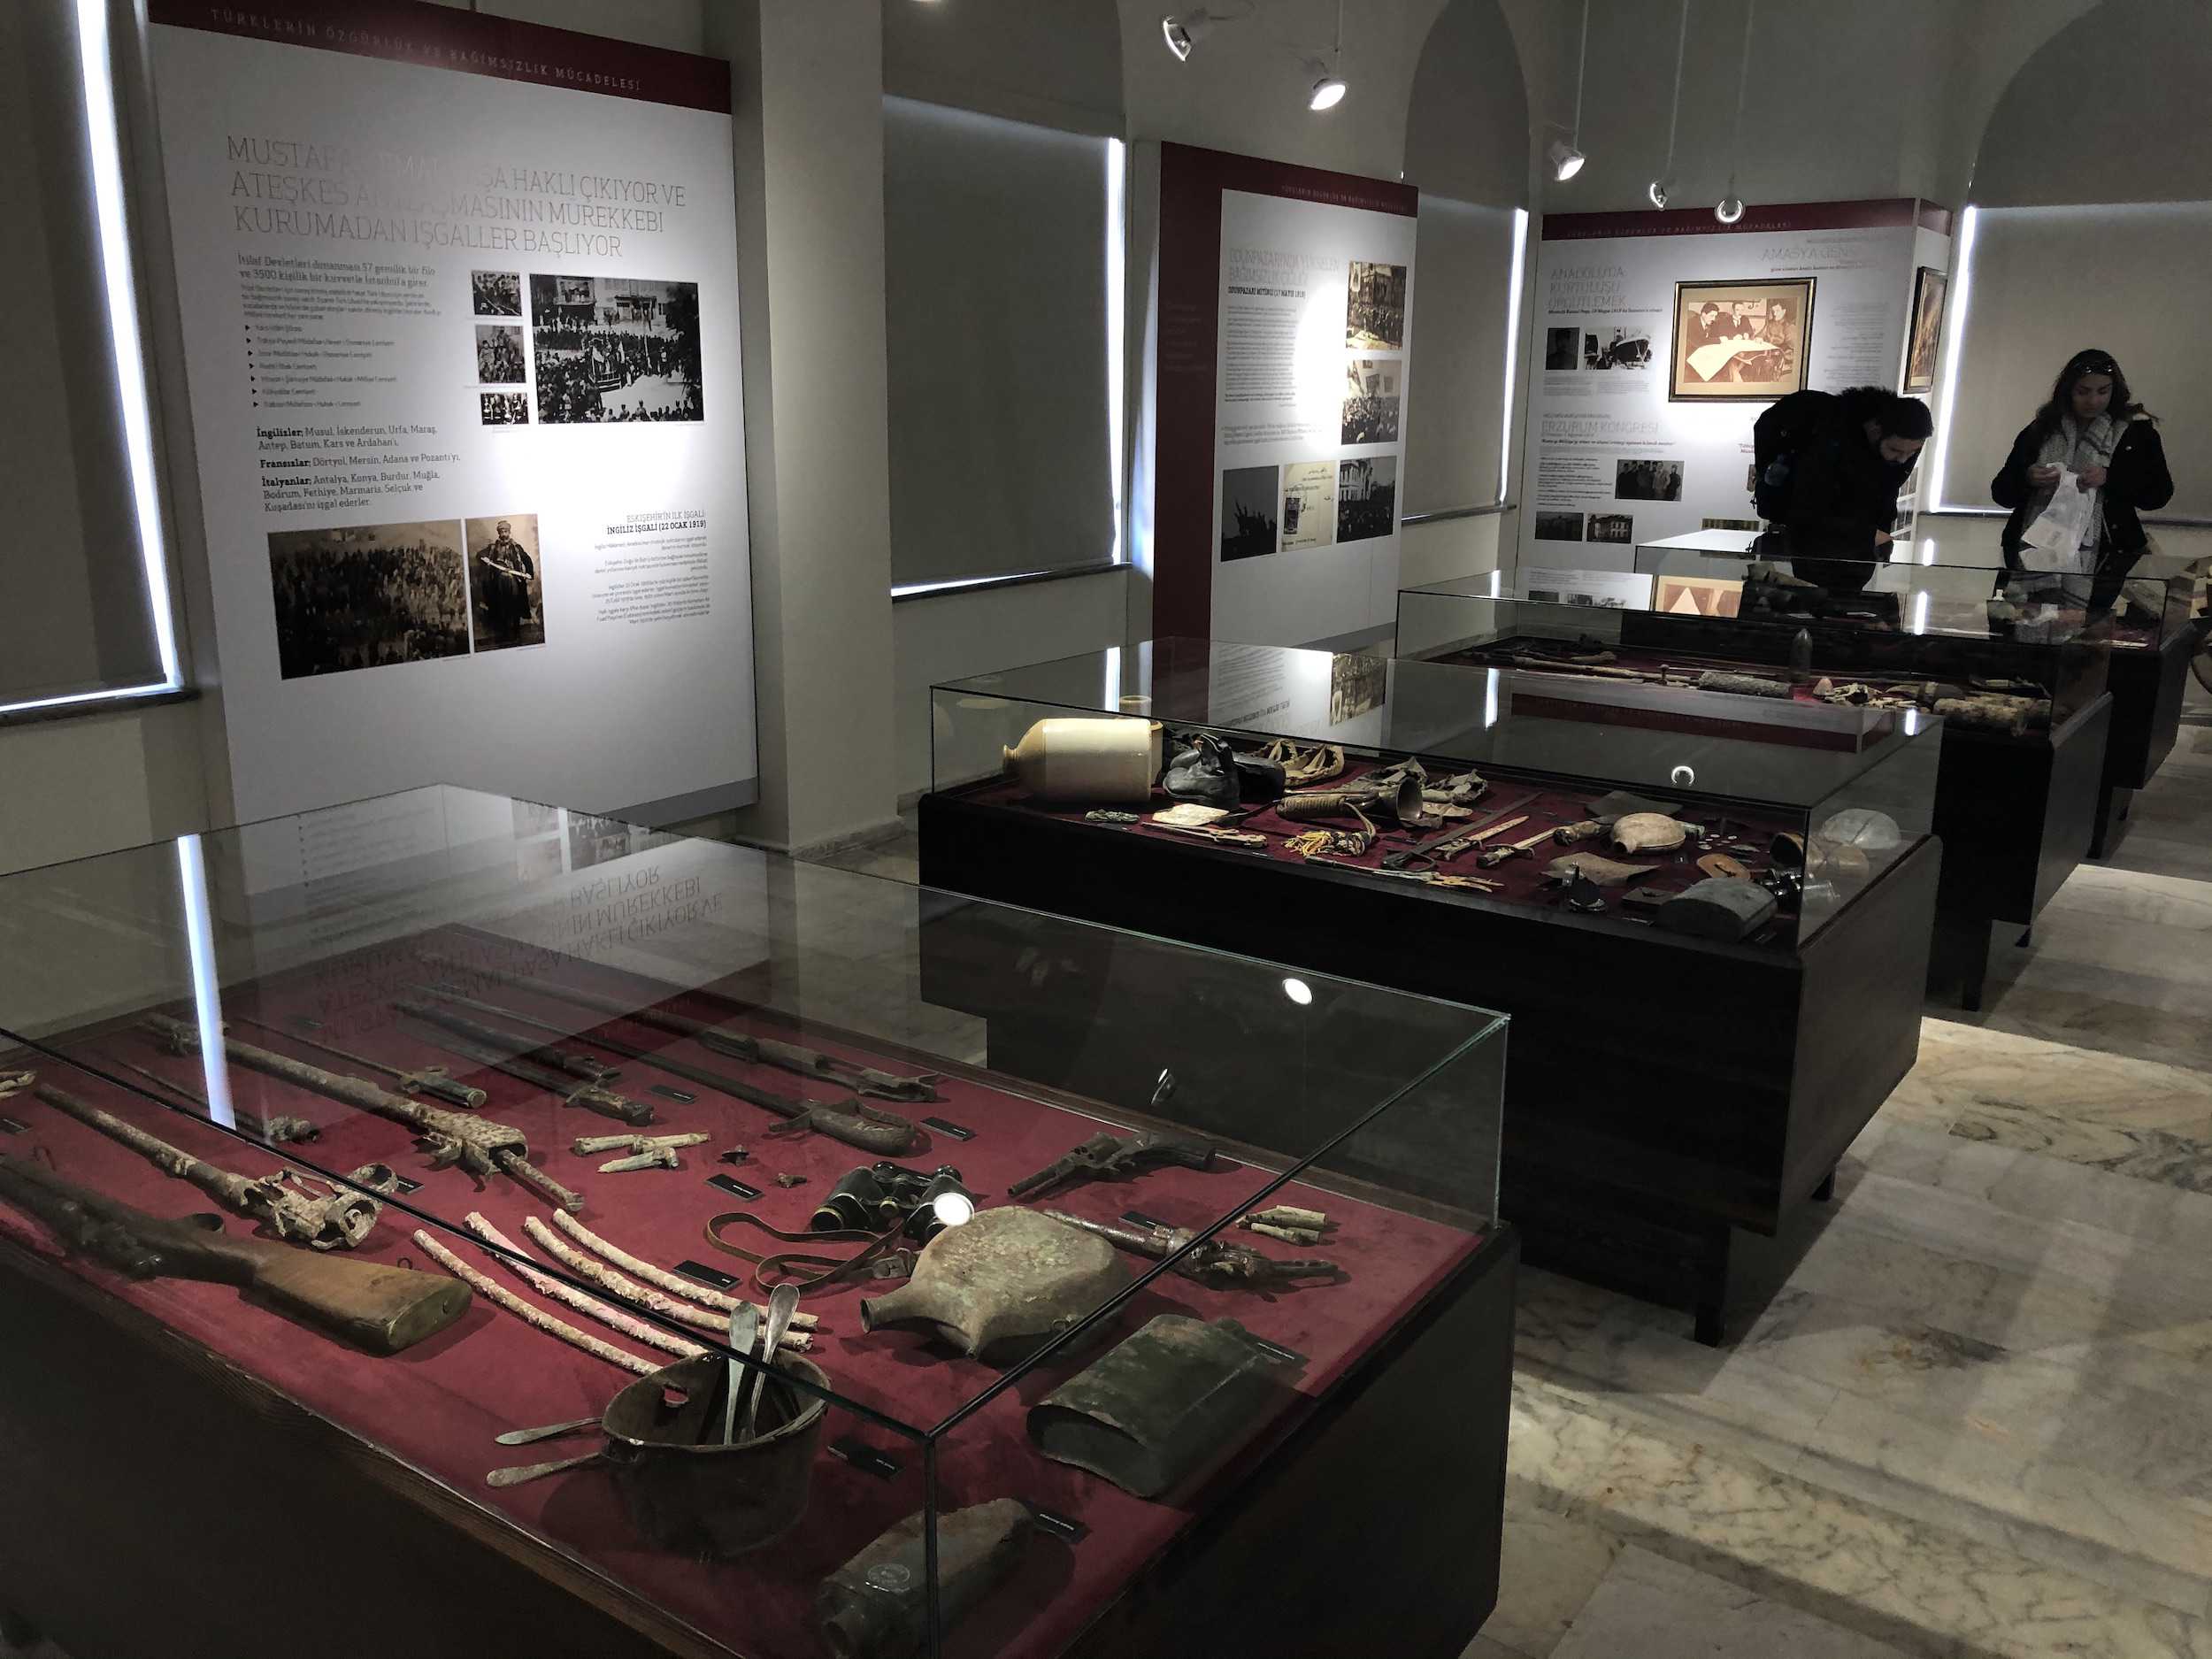 Gallipoli campaign and the Turkish War of Independence gallery at the Anadolu University Republic History Museum in Eskişehir, Turkey